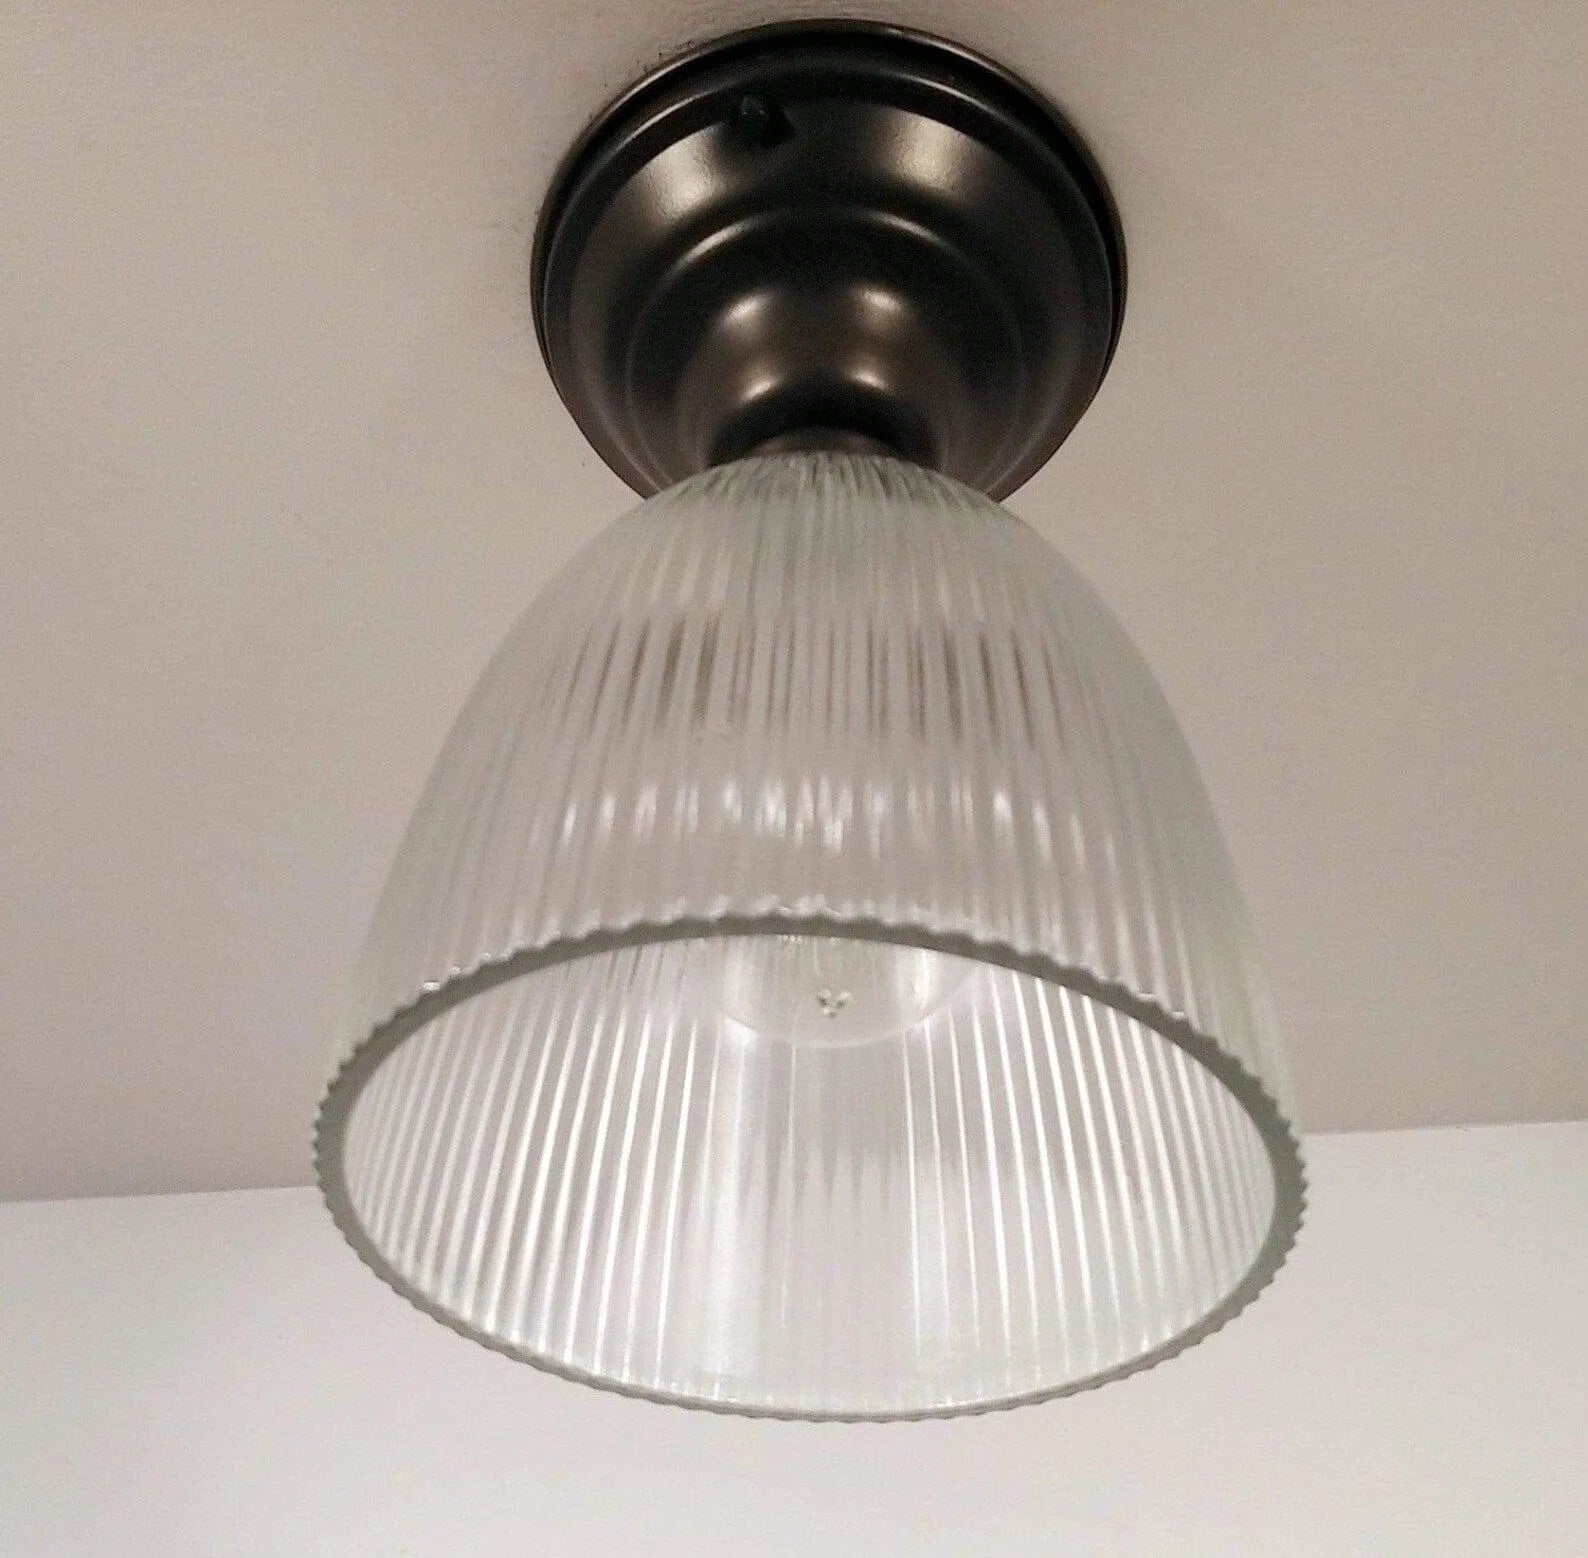 Vintage Factory Holophane Industrial Ceiling LIGHT The Lamp Goods